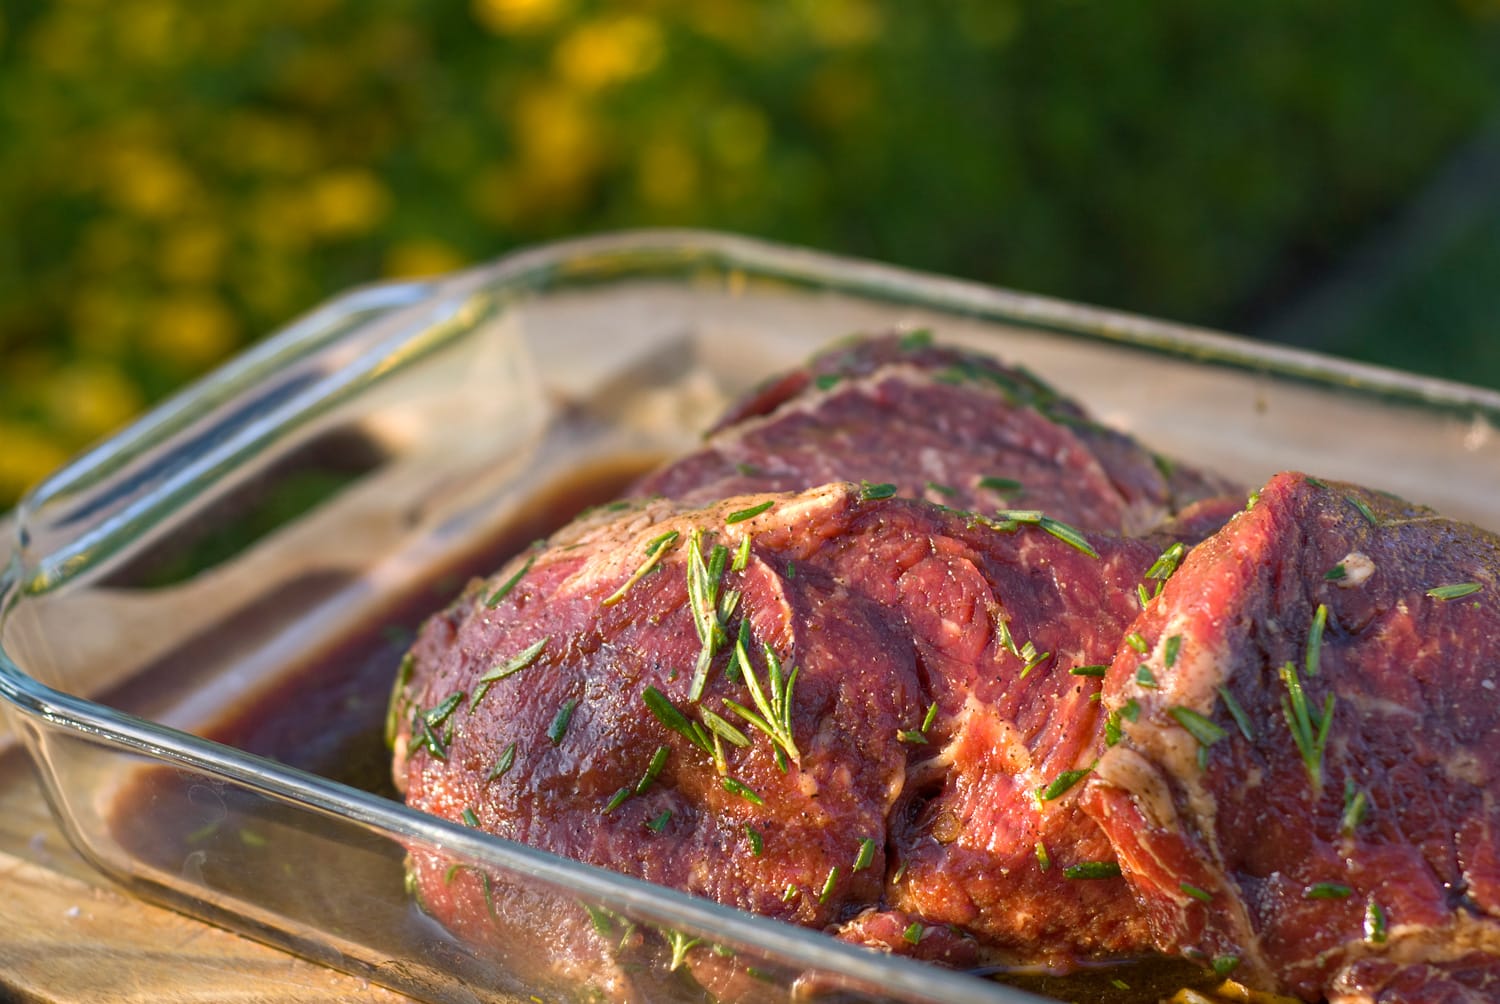 Beef Rib Eye Steaks, Raw Meat & Rosemary Marinade & Barbeque Cooking